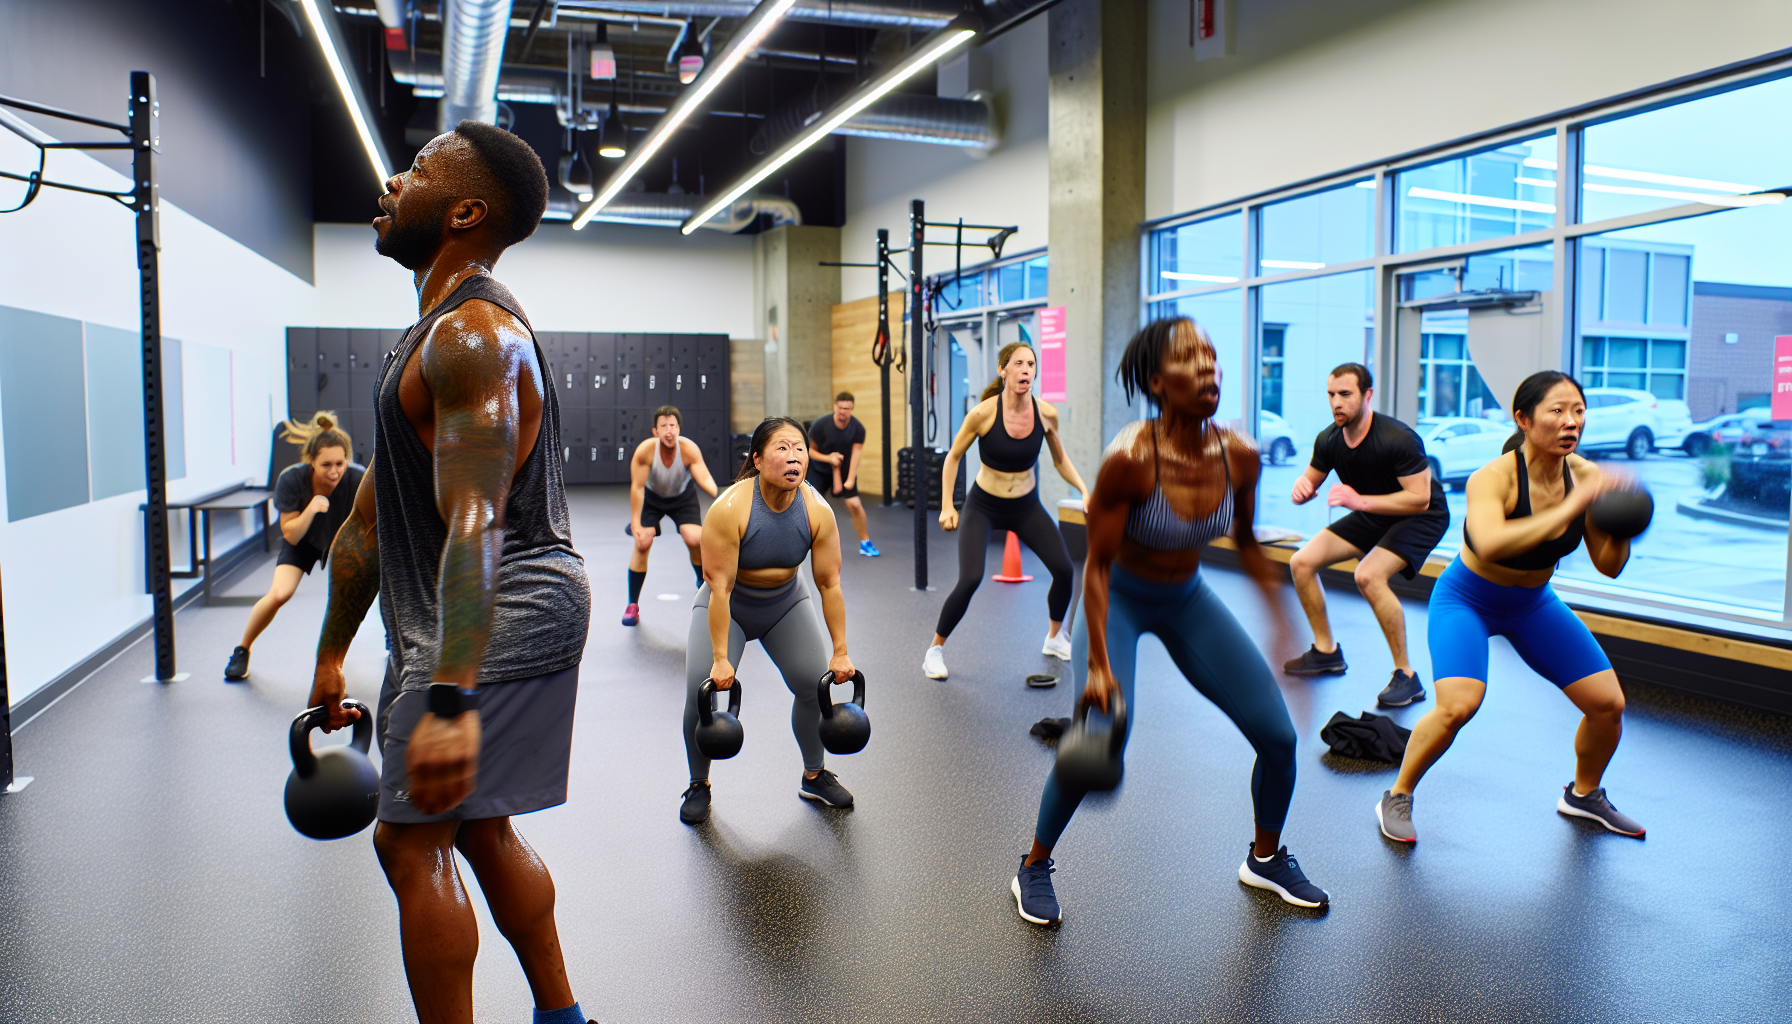 Community culture and group fitness class at a Vancouver gym